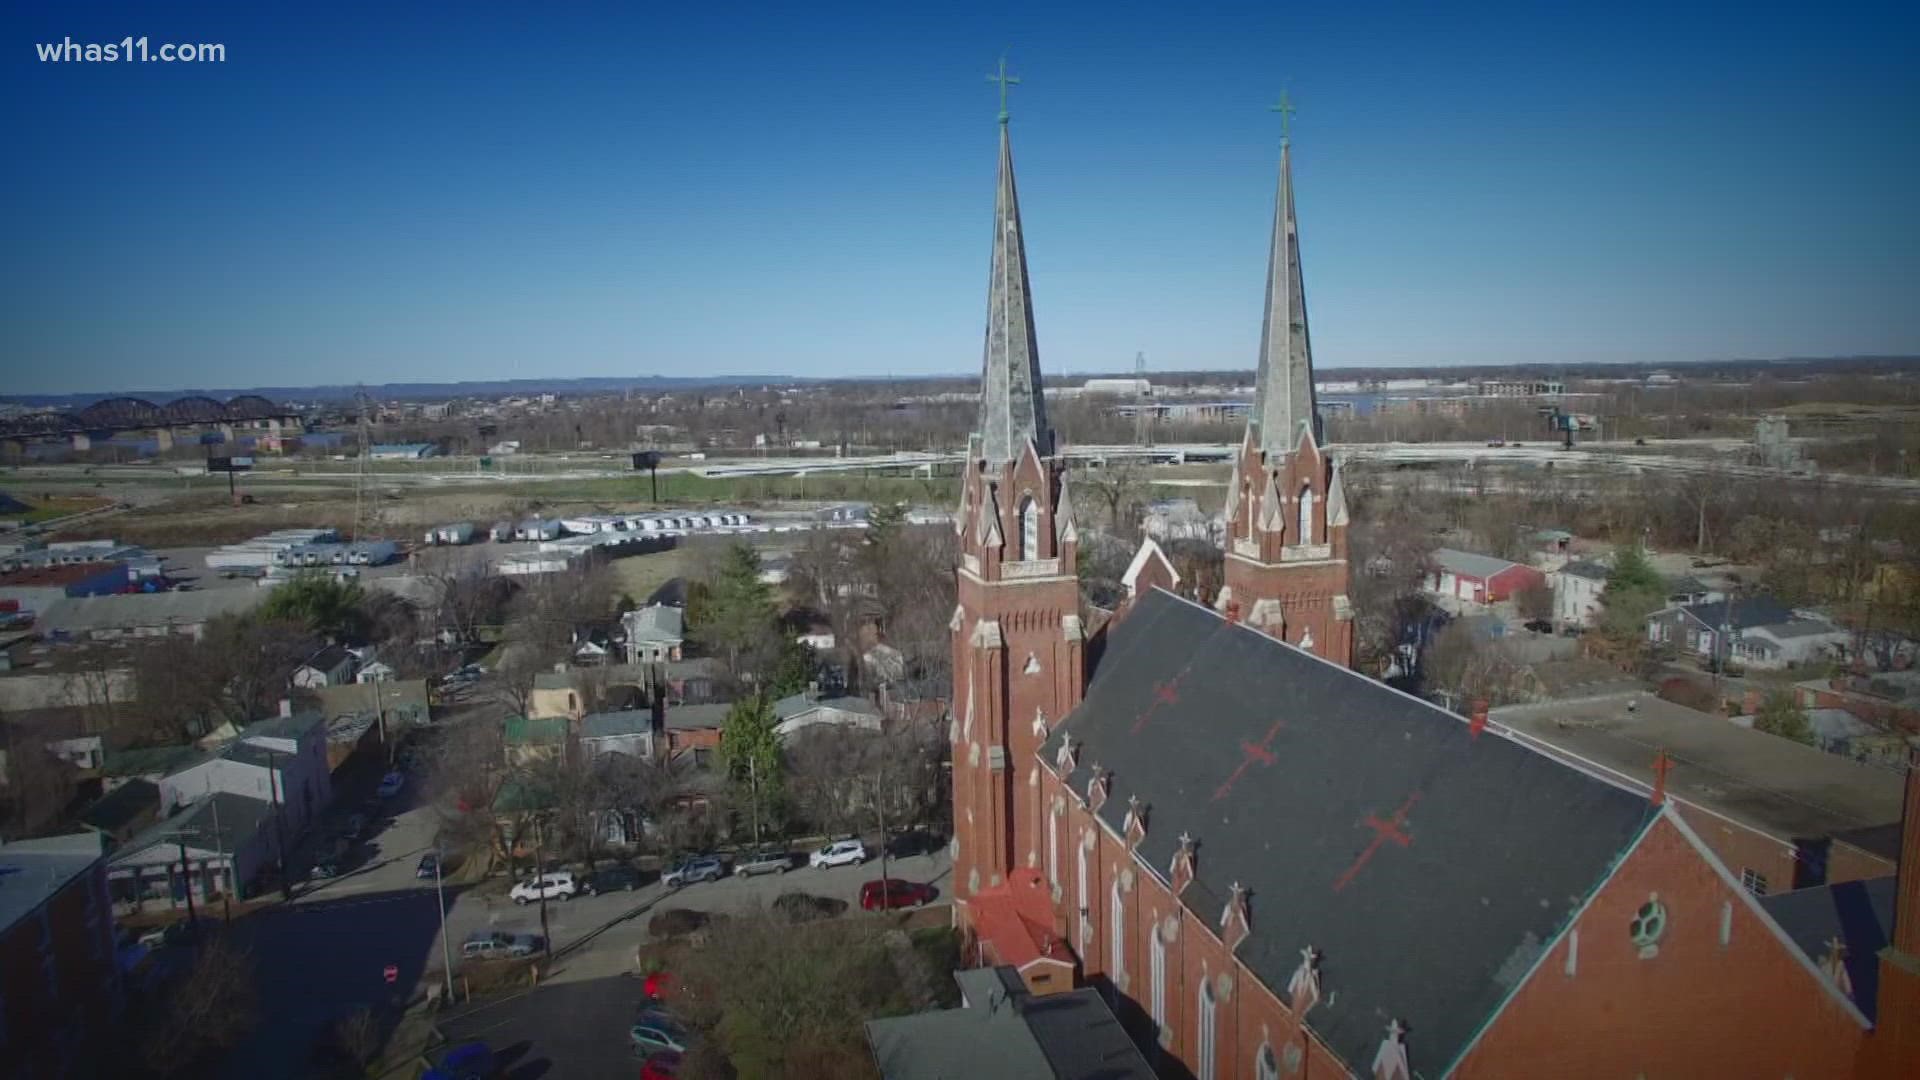 The 156-year-old church paid roughly a million dollars to complete it.